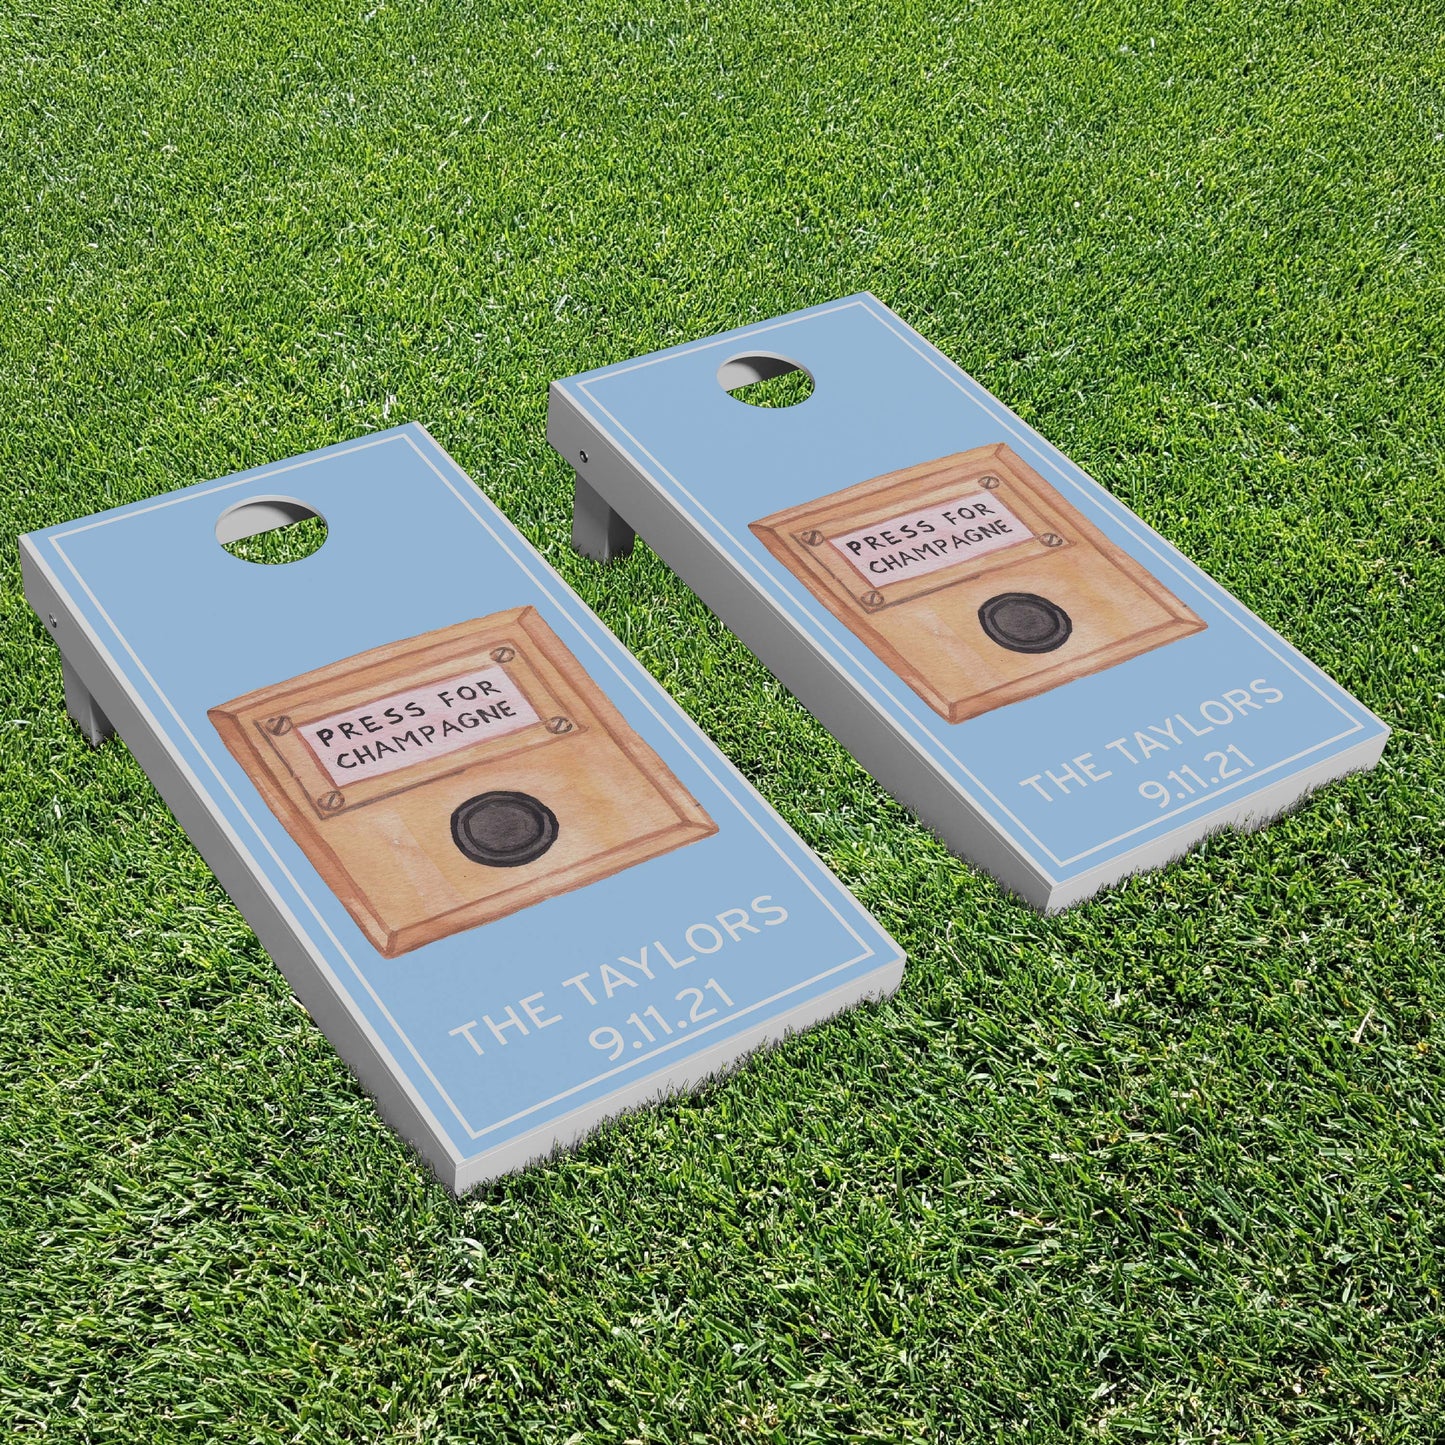 Luxury Personalized Press For Champagne Cornhole Boards - A Perfect Gift!